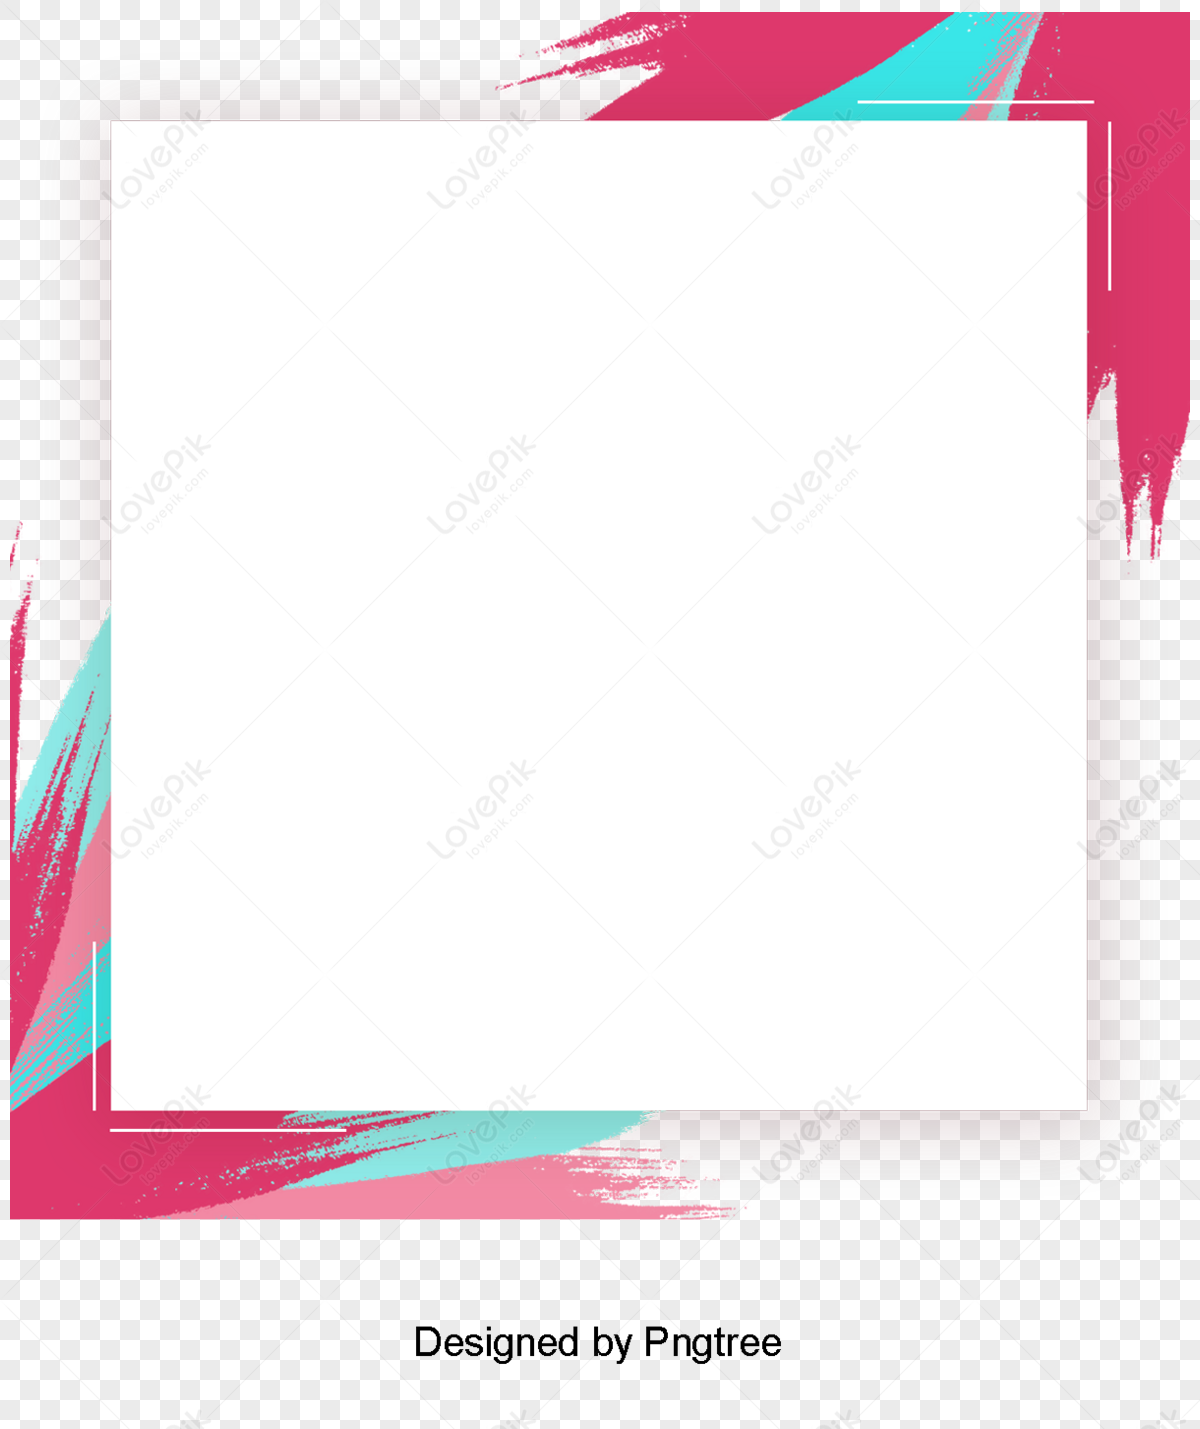 Stylish And Simple Border Design,paper Product,style,color PNG Free ...